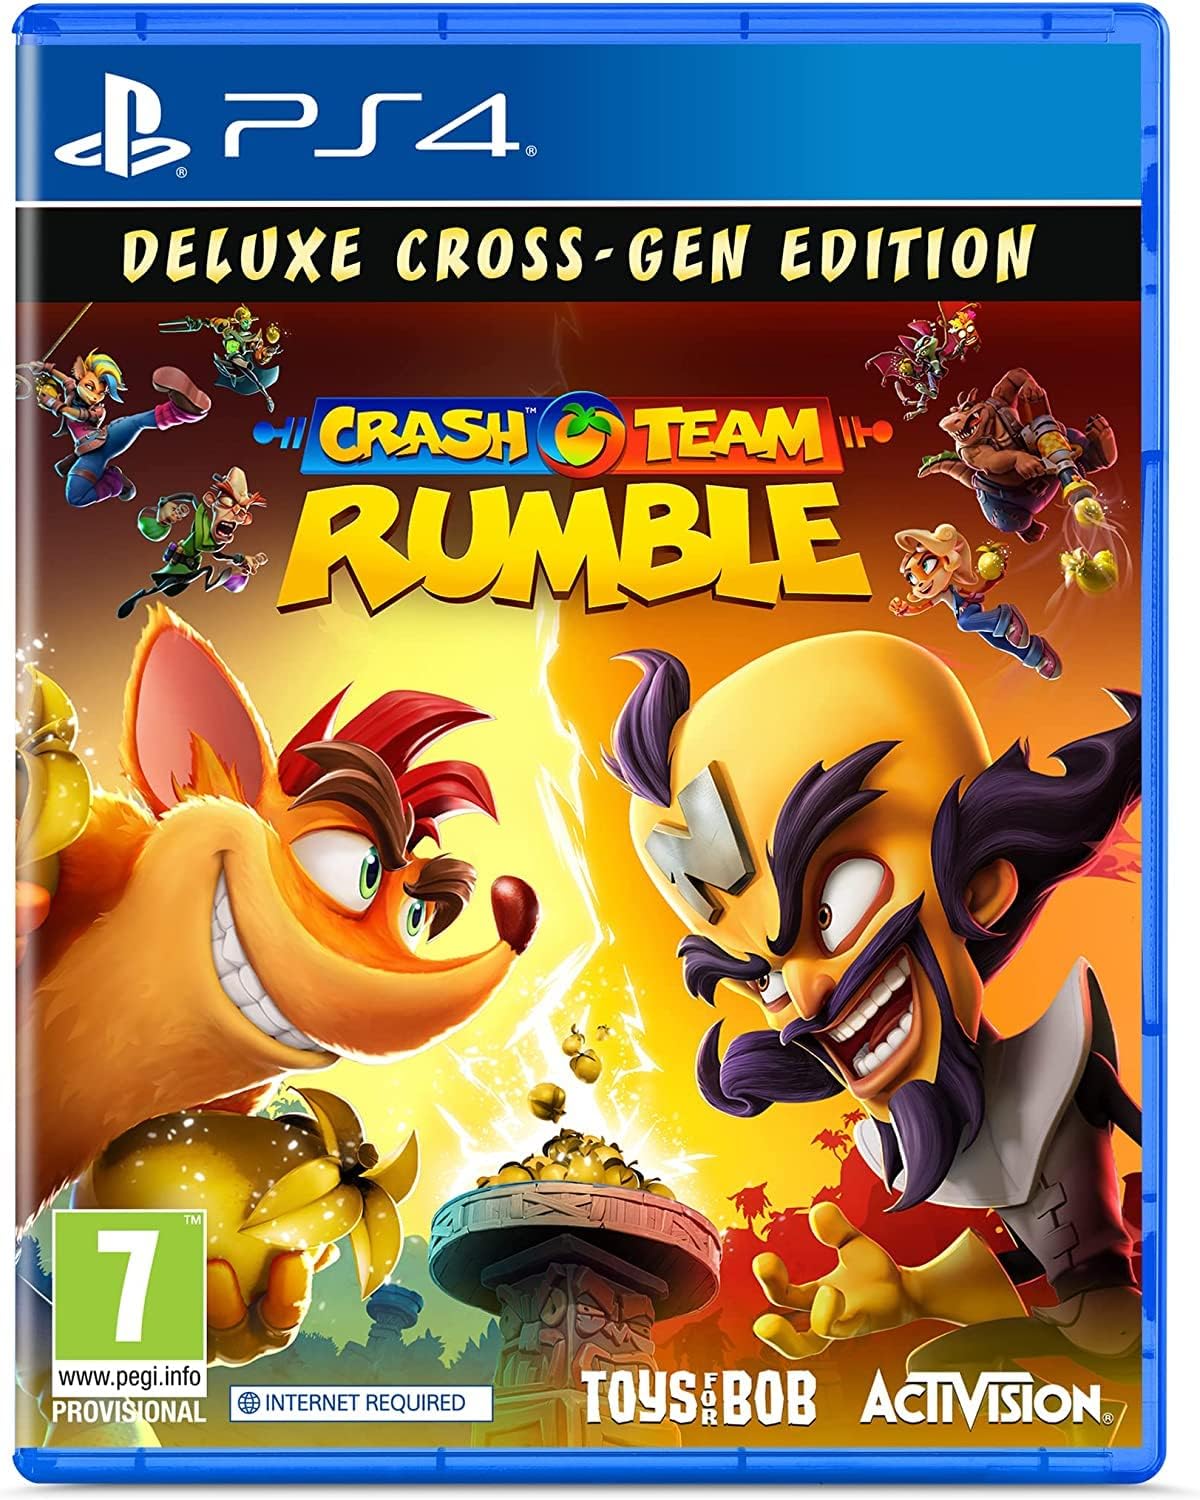 Crash team rumble PS4 - Deluxe Edition